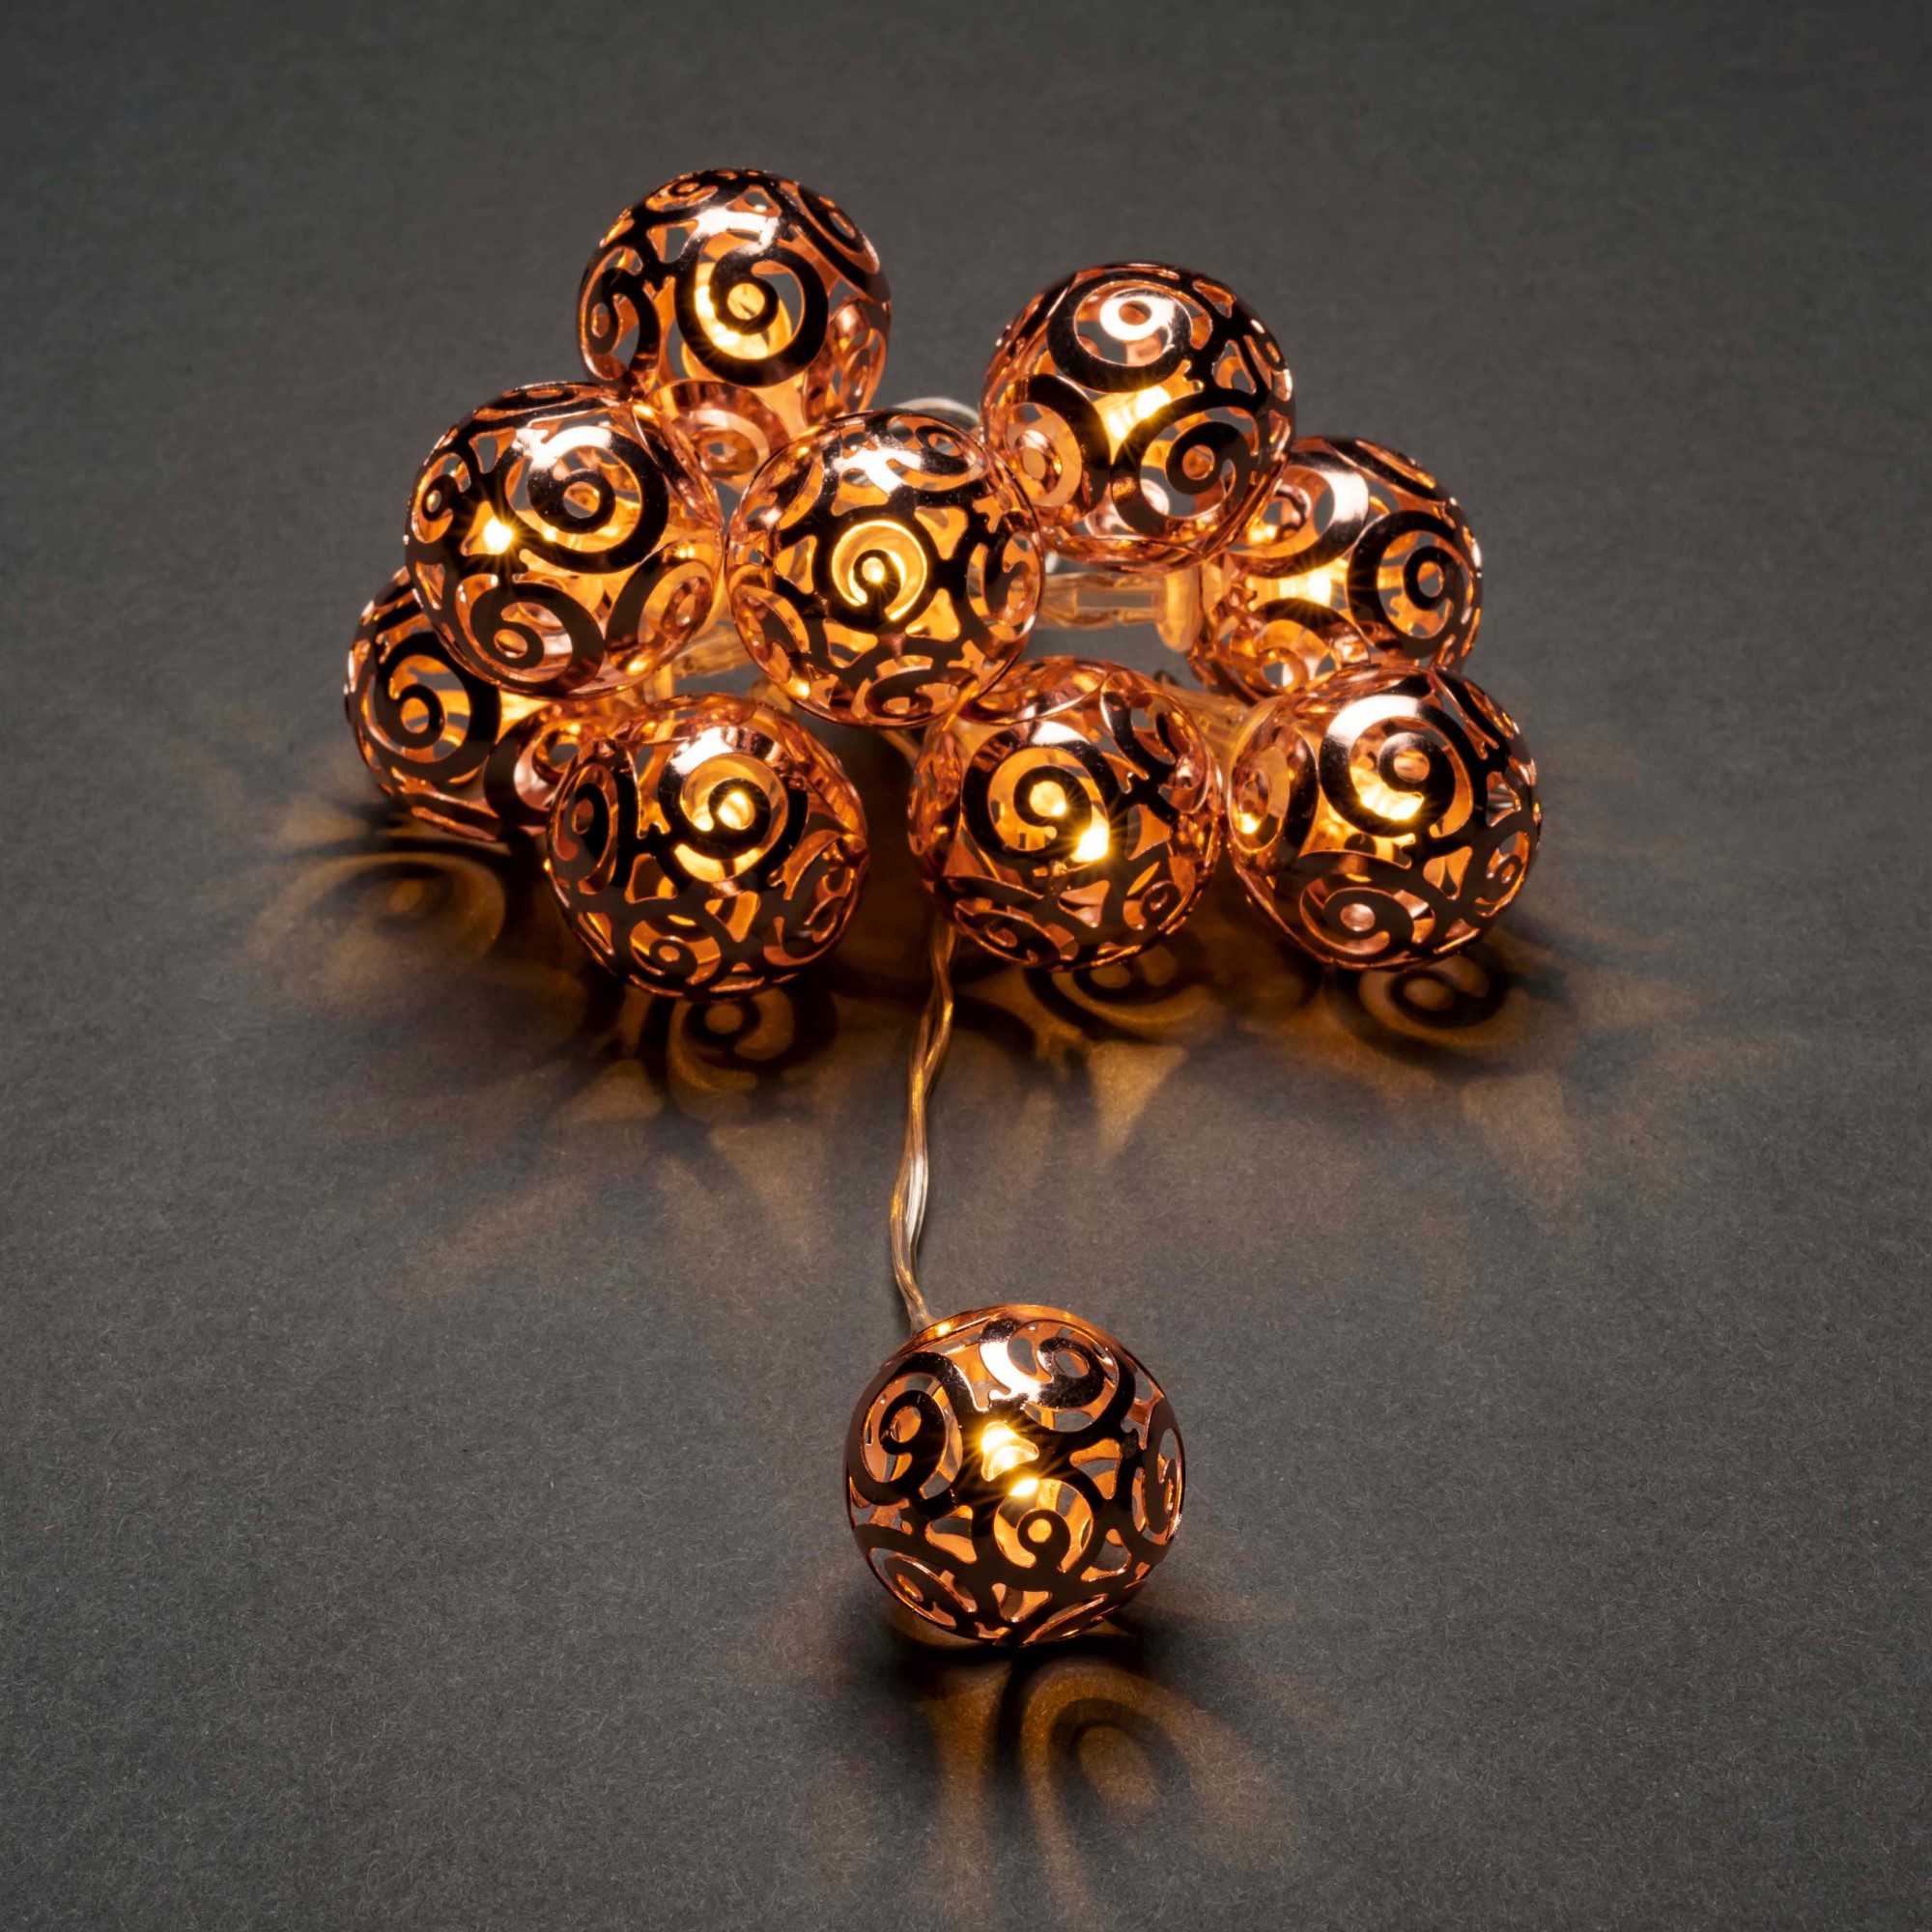 Konstsmide Decorative LED Light Chain, Copper-Coloured Metal Balls, 10 warm white LEDS, 6h Timer, battery operated 3lm